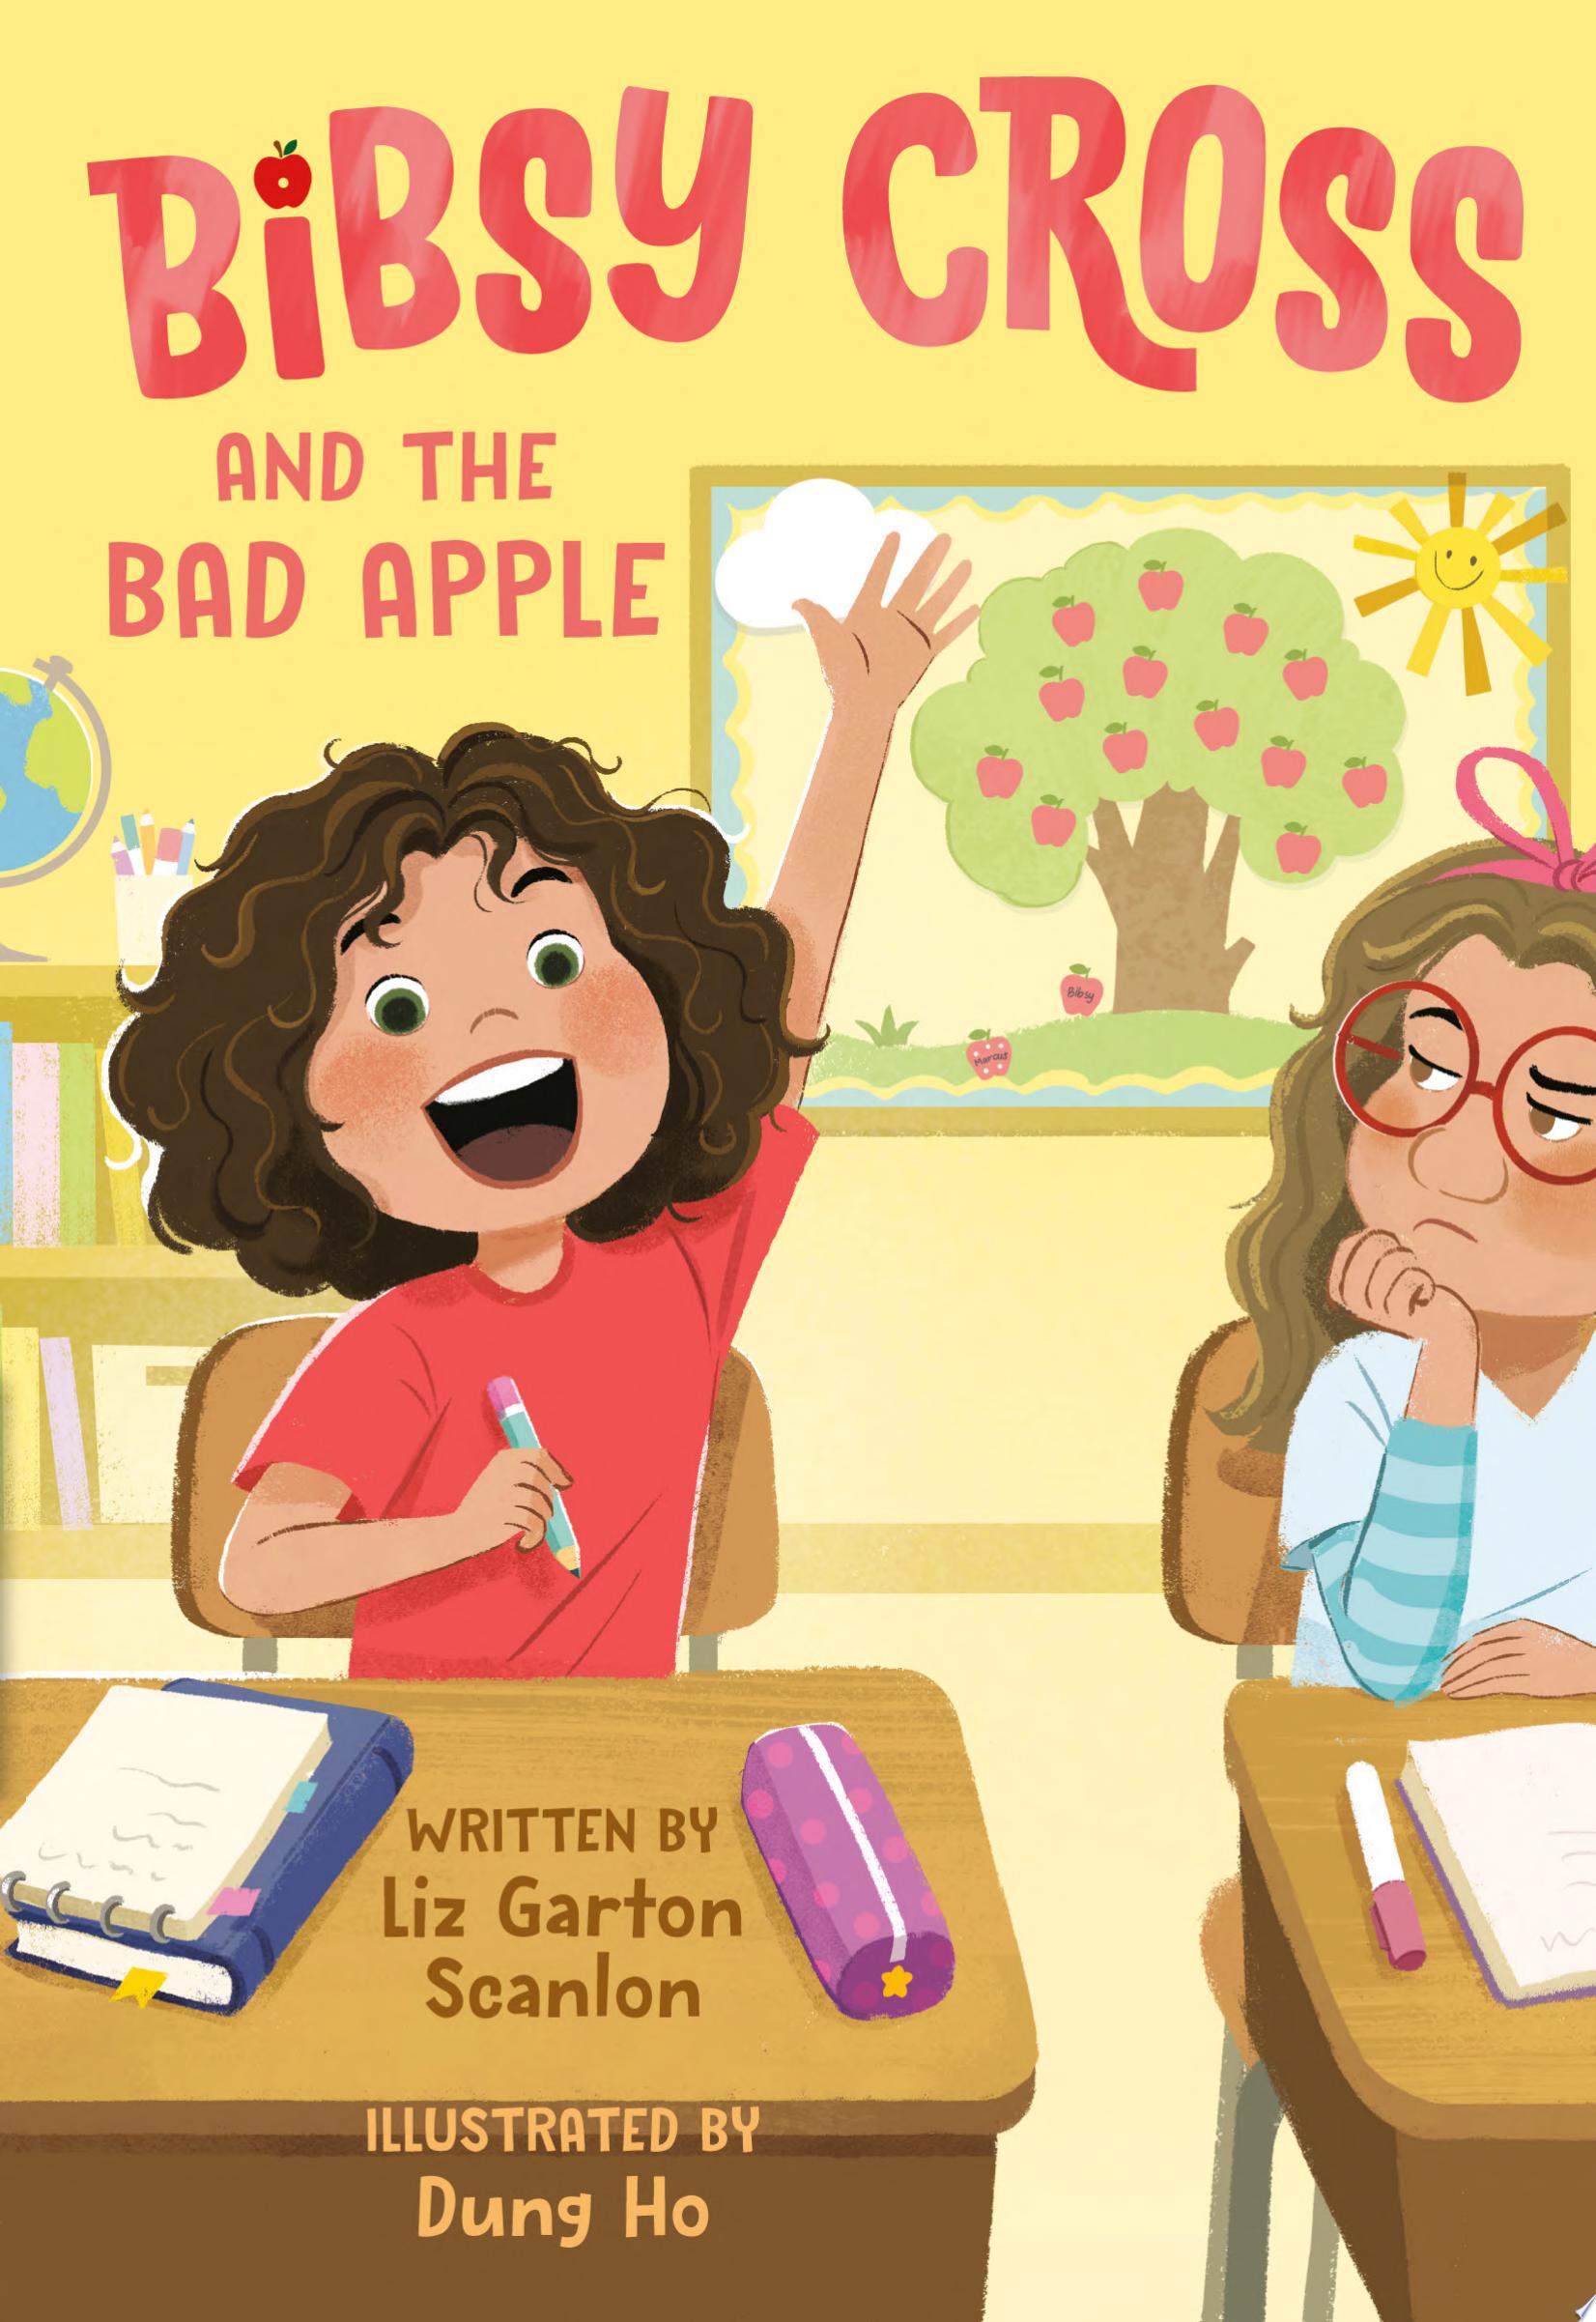 Image for "Bibsy Cross and the Bad Apple"